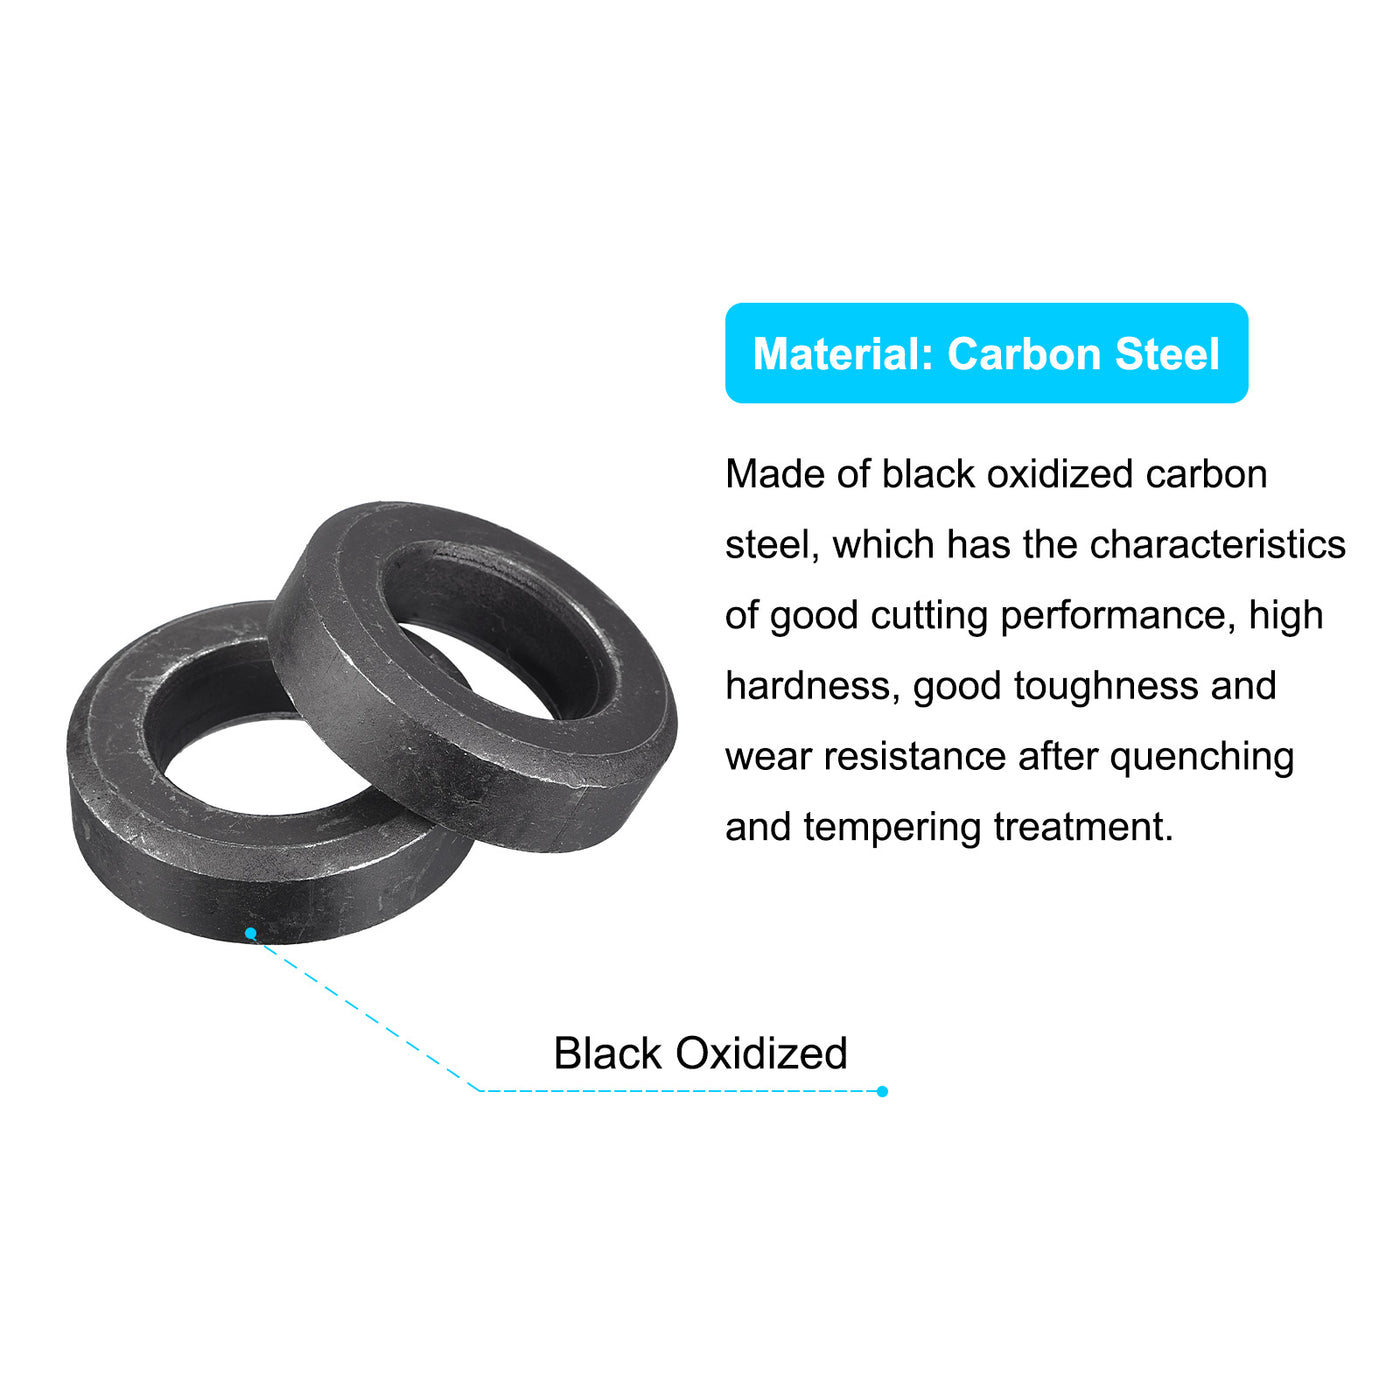 uxcell Uxcell M20 Carbon Steel Flat Washer 2pcs 21x38x10.5mm Grade 8.8 Alloy Steel Fasteners